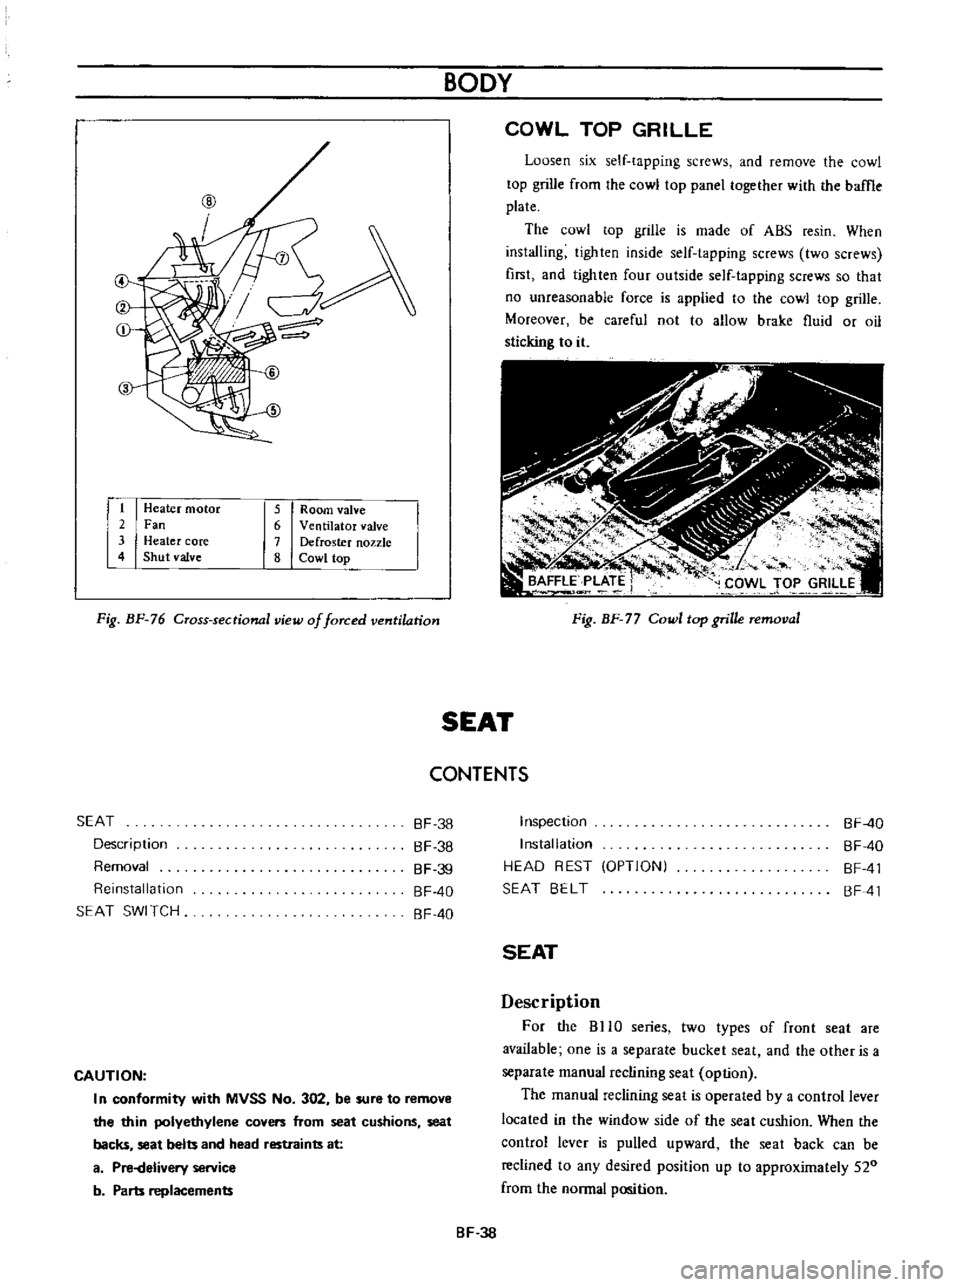 DATSUN B110 1973  Service Owners Guide 
@
c

@

CD

w

1

Heater 
motor

2

Fan

3 
Heater

core

4

Shut 
valve 
5

Room

valve

6

Ventilator 
valve

7

Defroster 
nozzle

8 
Cowl

top

Fig 
BF 
76

Cross 
sectional 
view

of 
forced 
ve